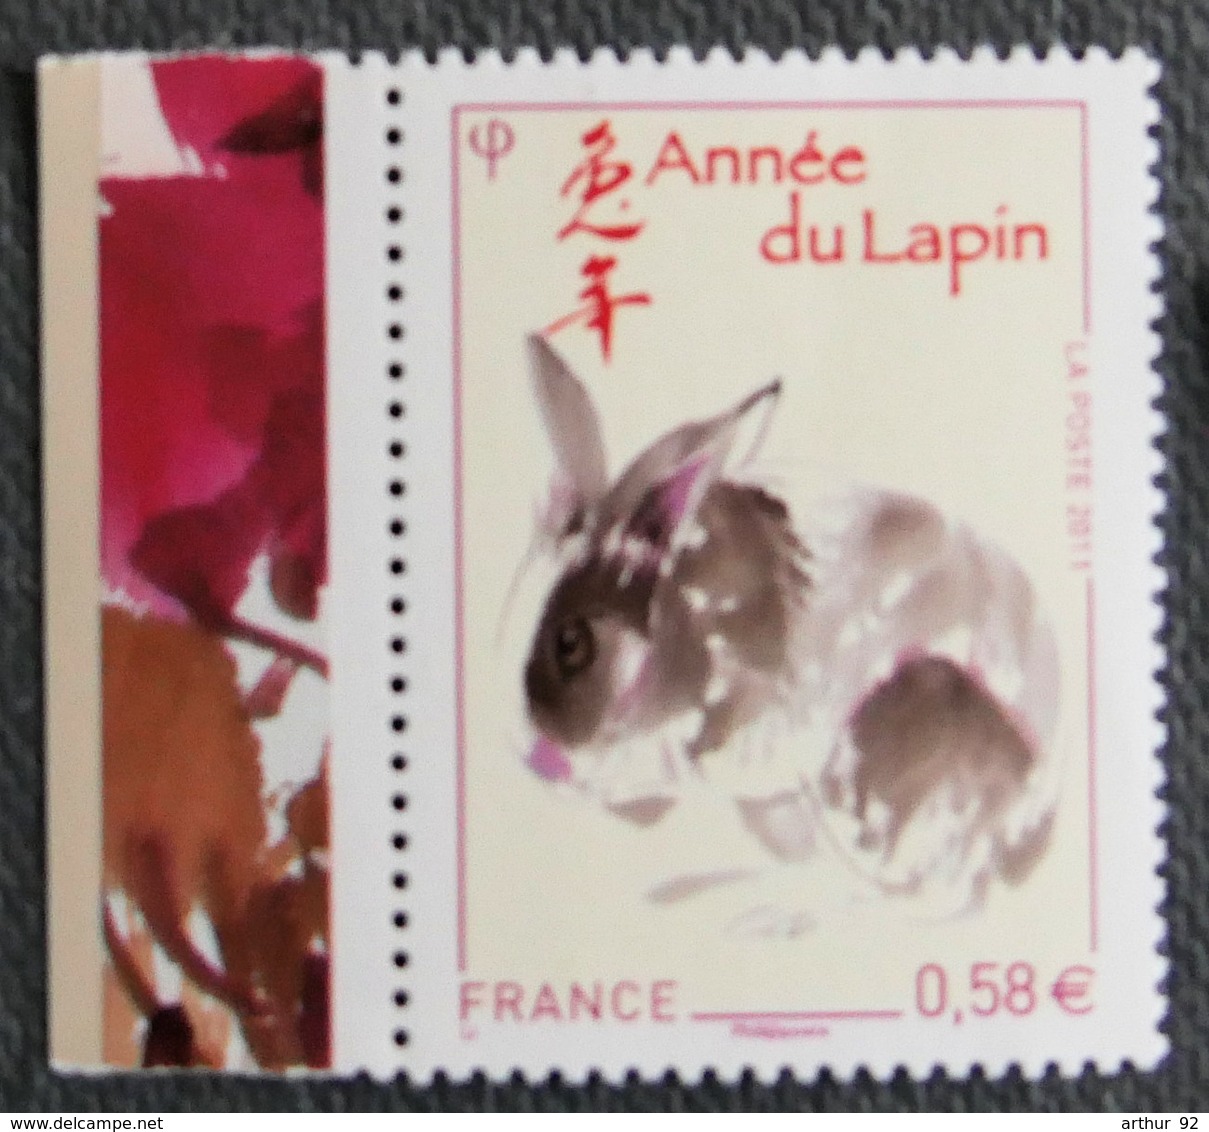 FRANCE - 4531** - Nouvel An Chinois - Année Du Lapin - Unused Stamps